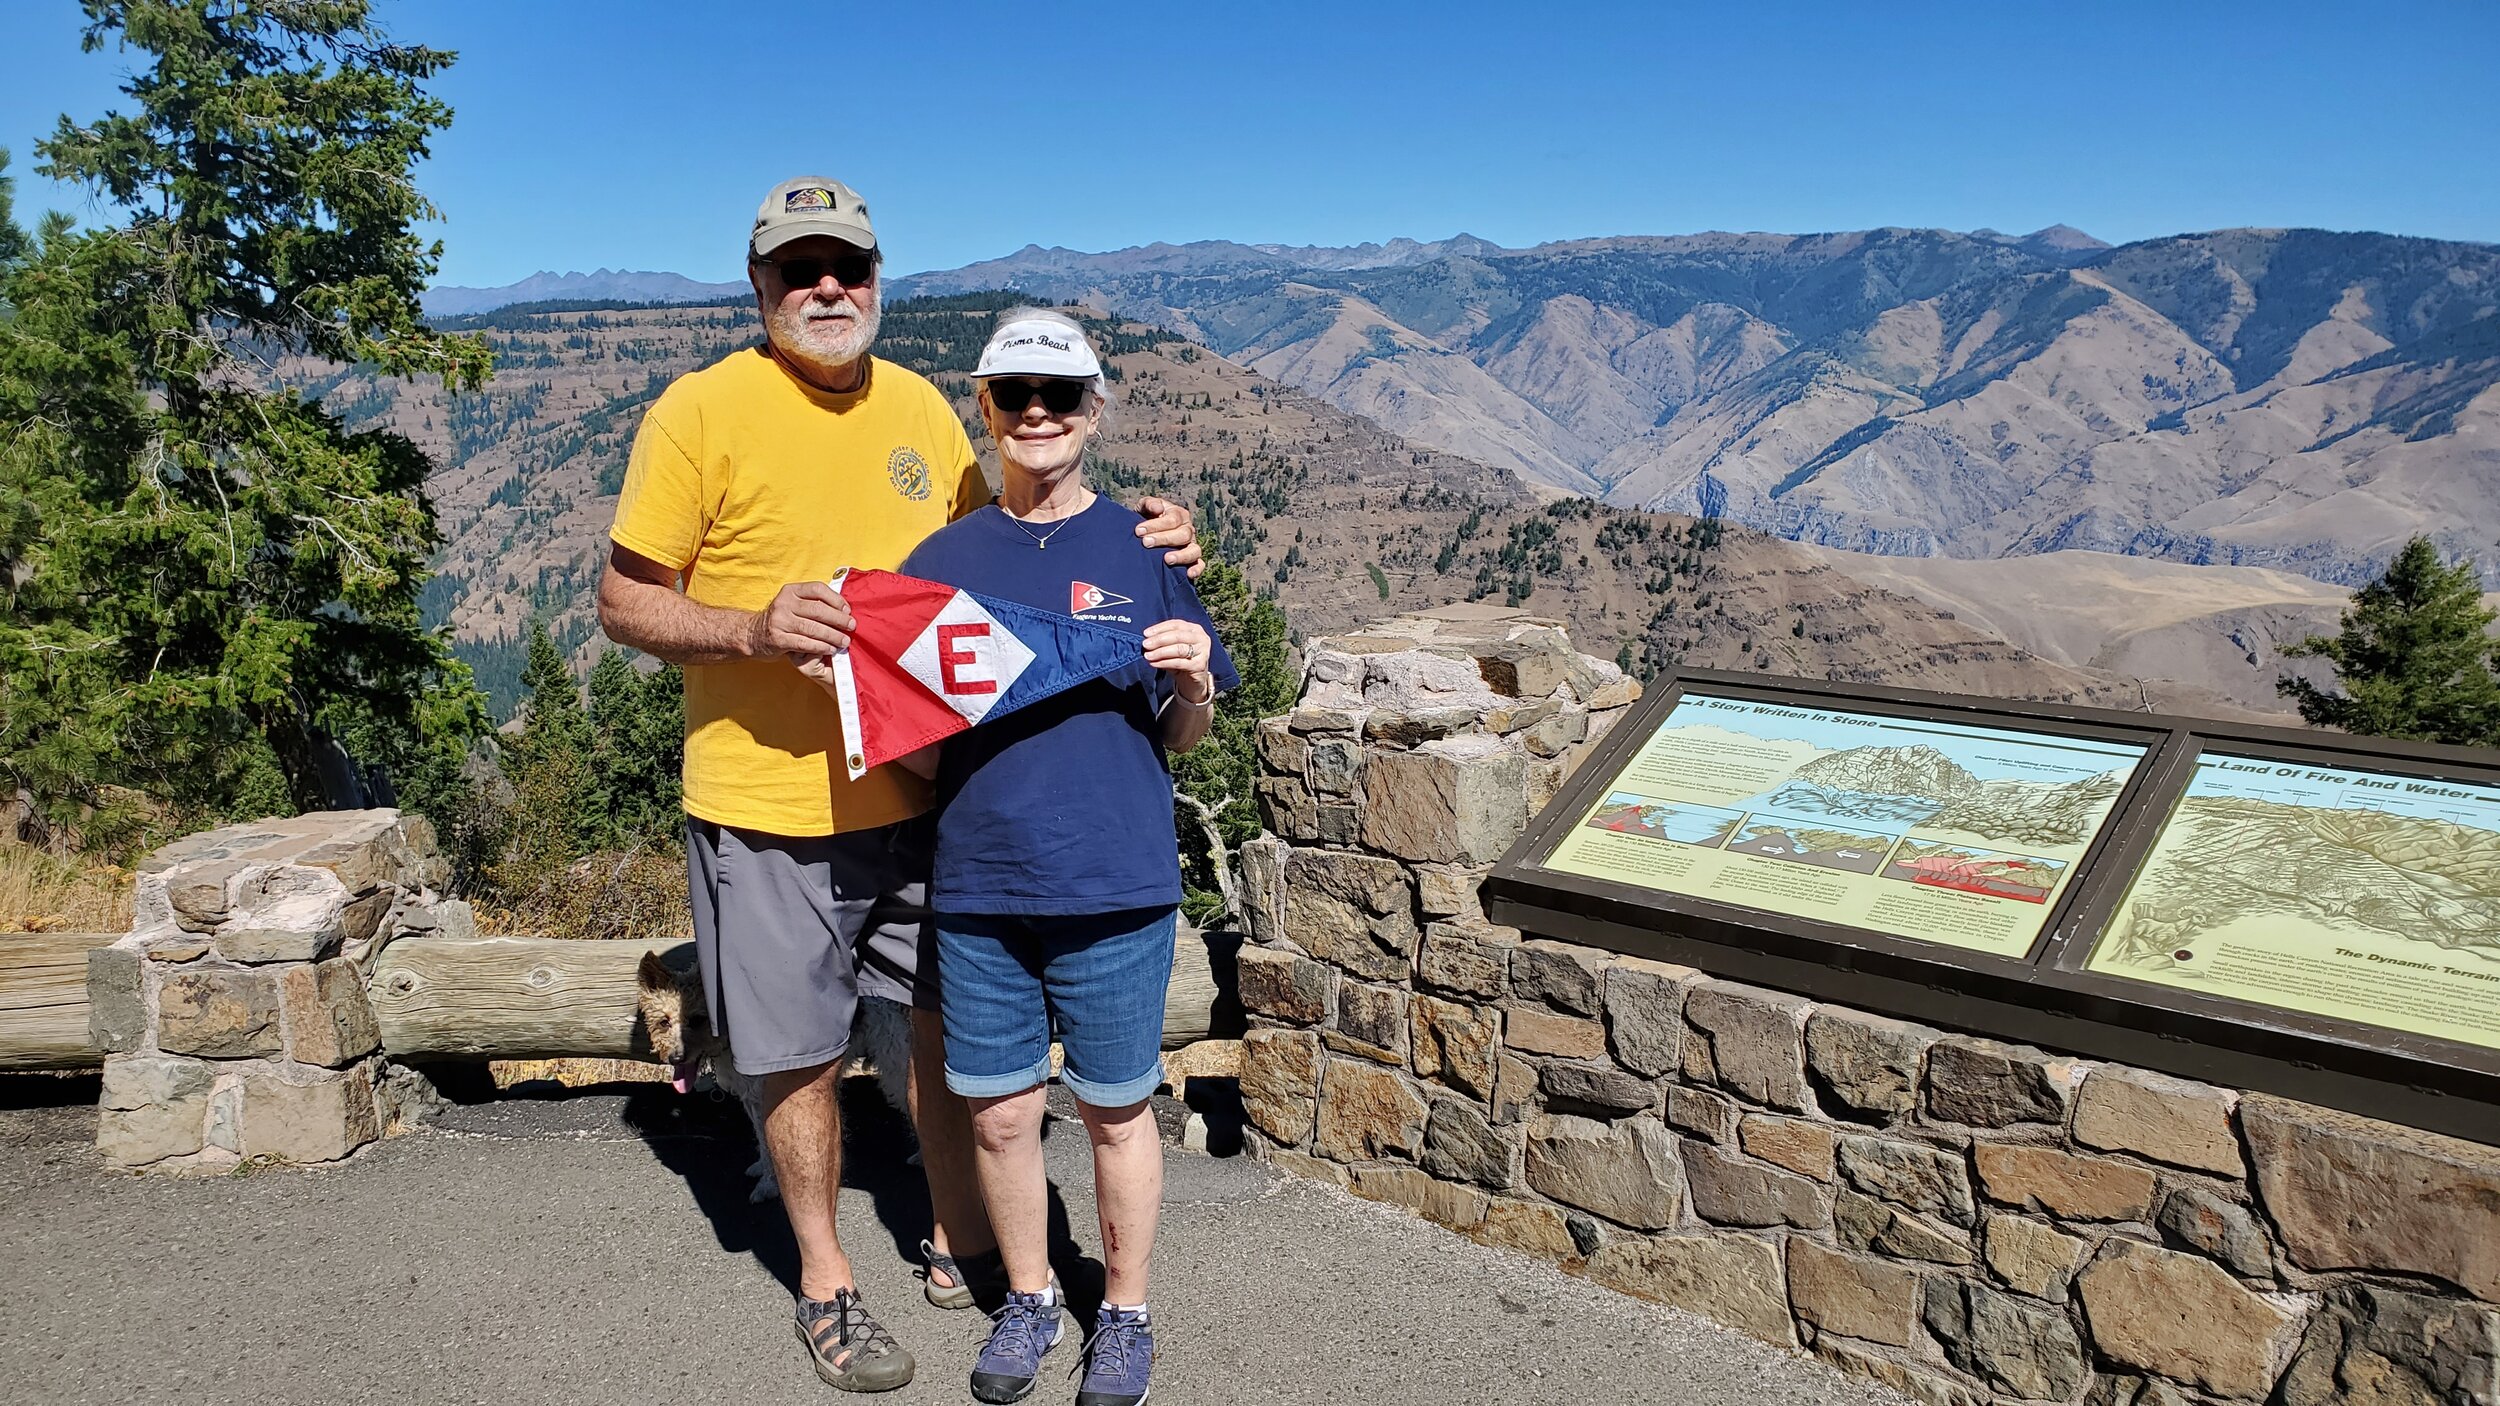  Murray and Linda showing their colors at Mount Saint Helens in Washington 